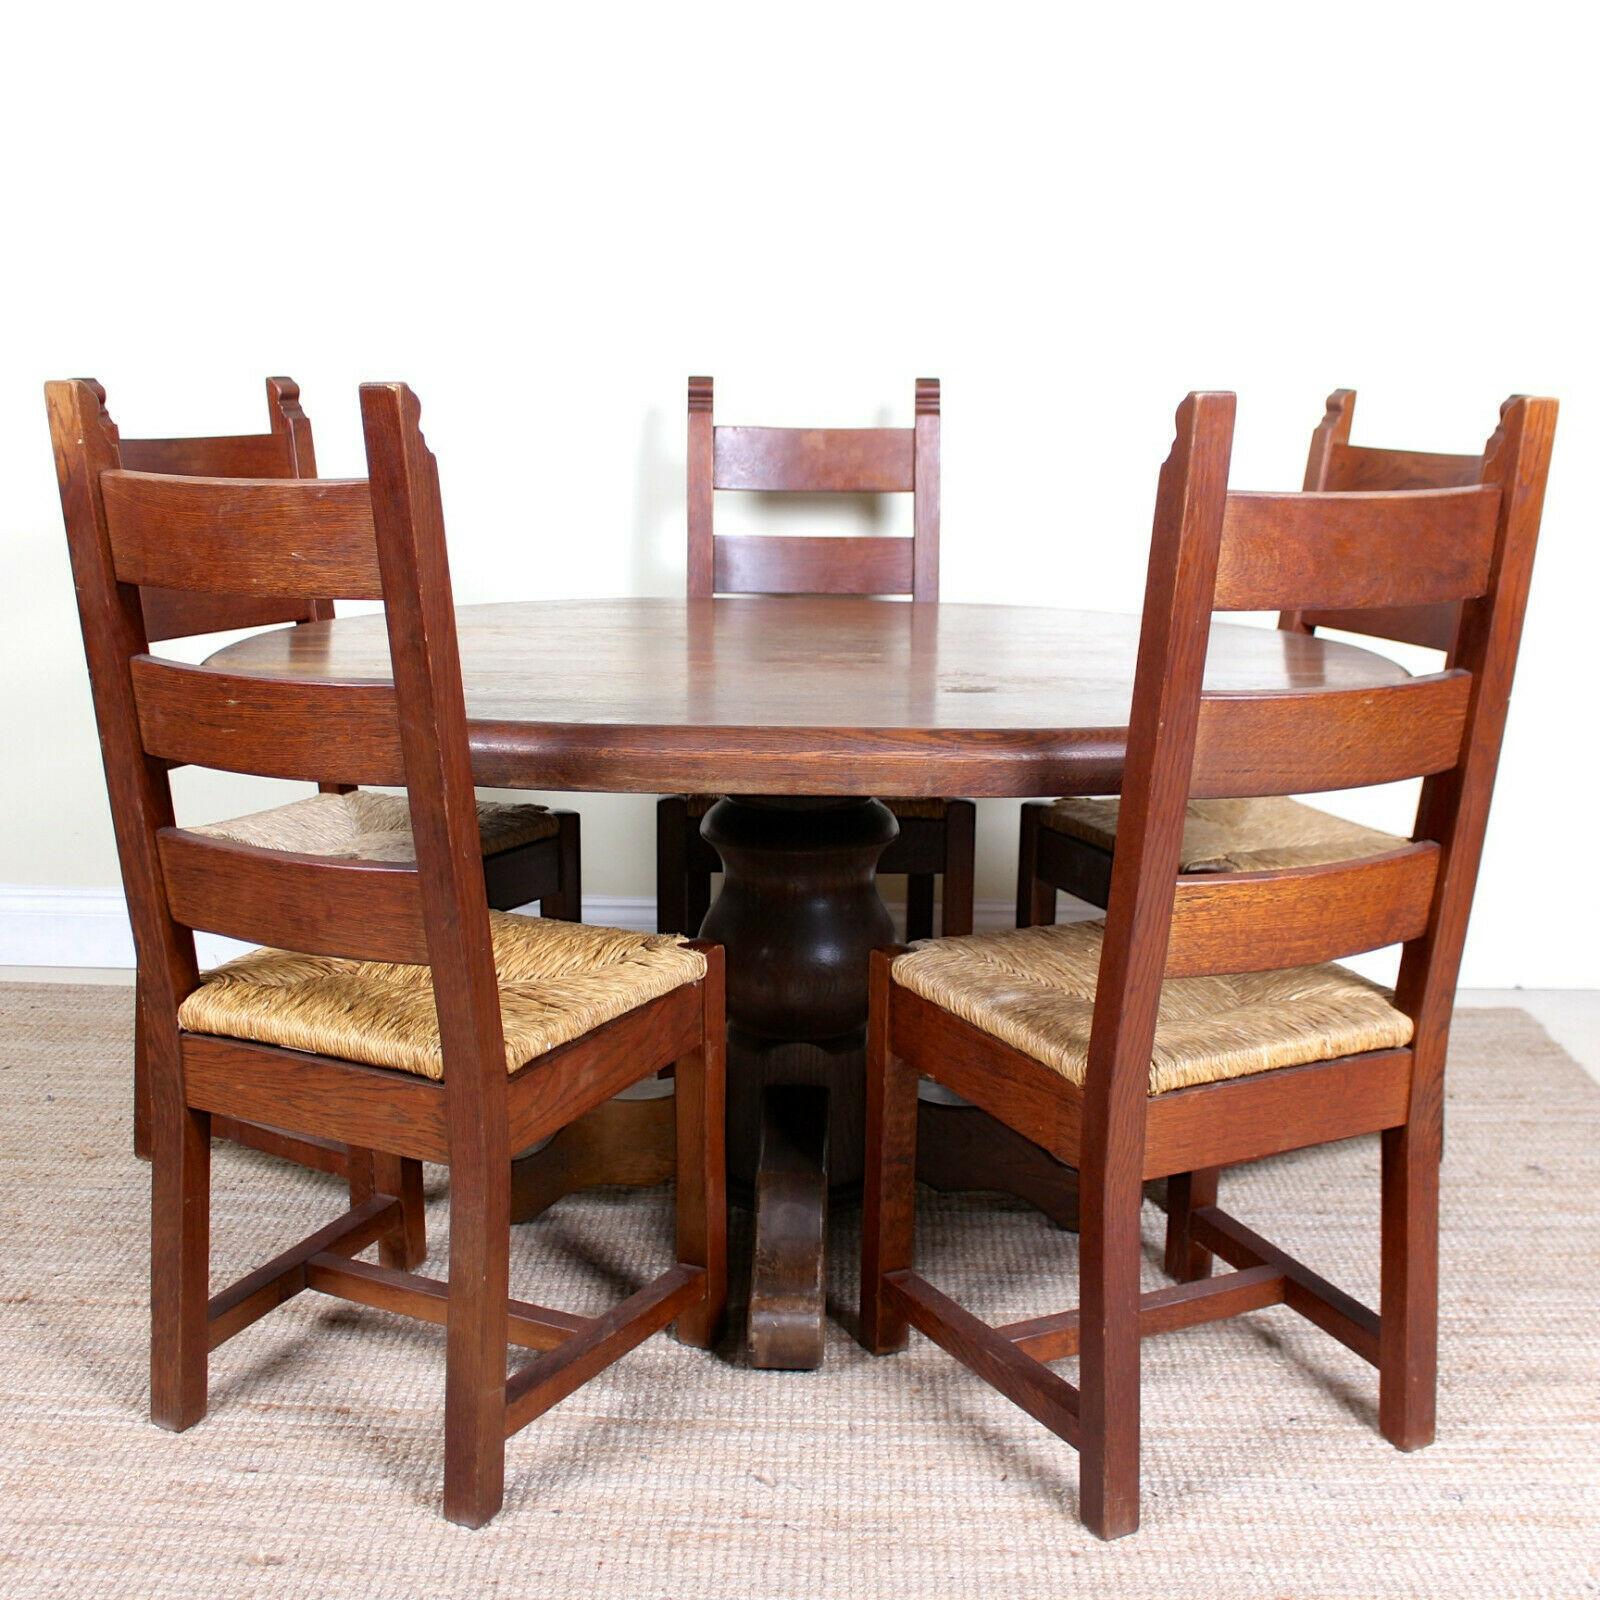 An impressive antique six-piece oak dining suite.
Constructed from thick cuts of oak boasting a well figured grain.
The dining chairs constructed from solid oak with rushwork seats.
The dining table with an oval top raised on a bulbous column and